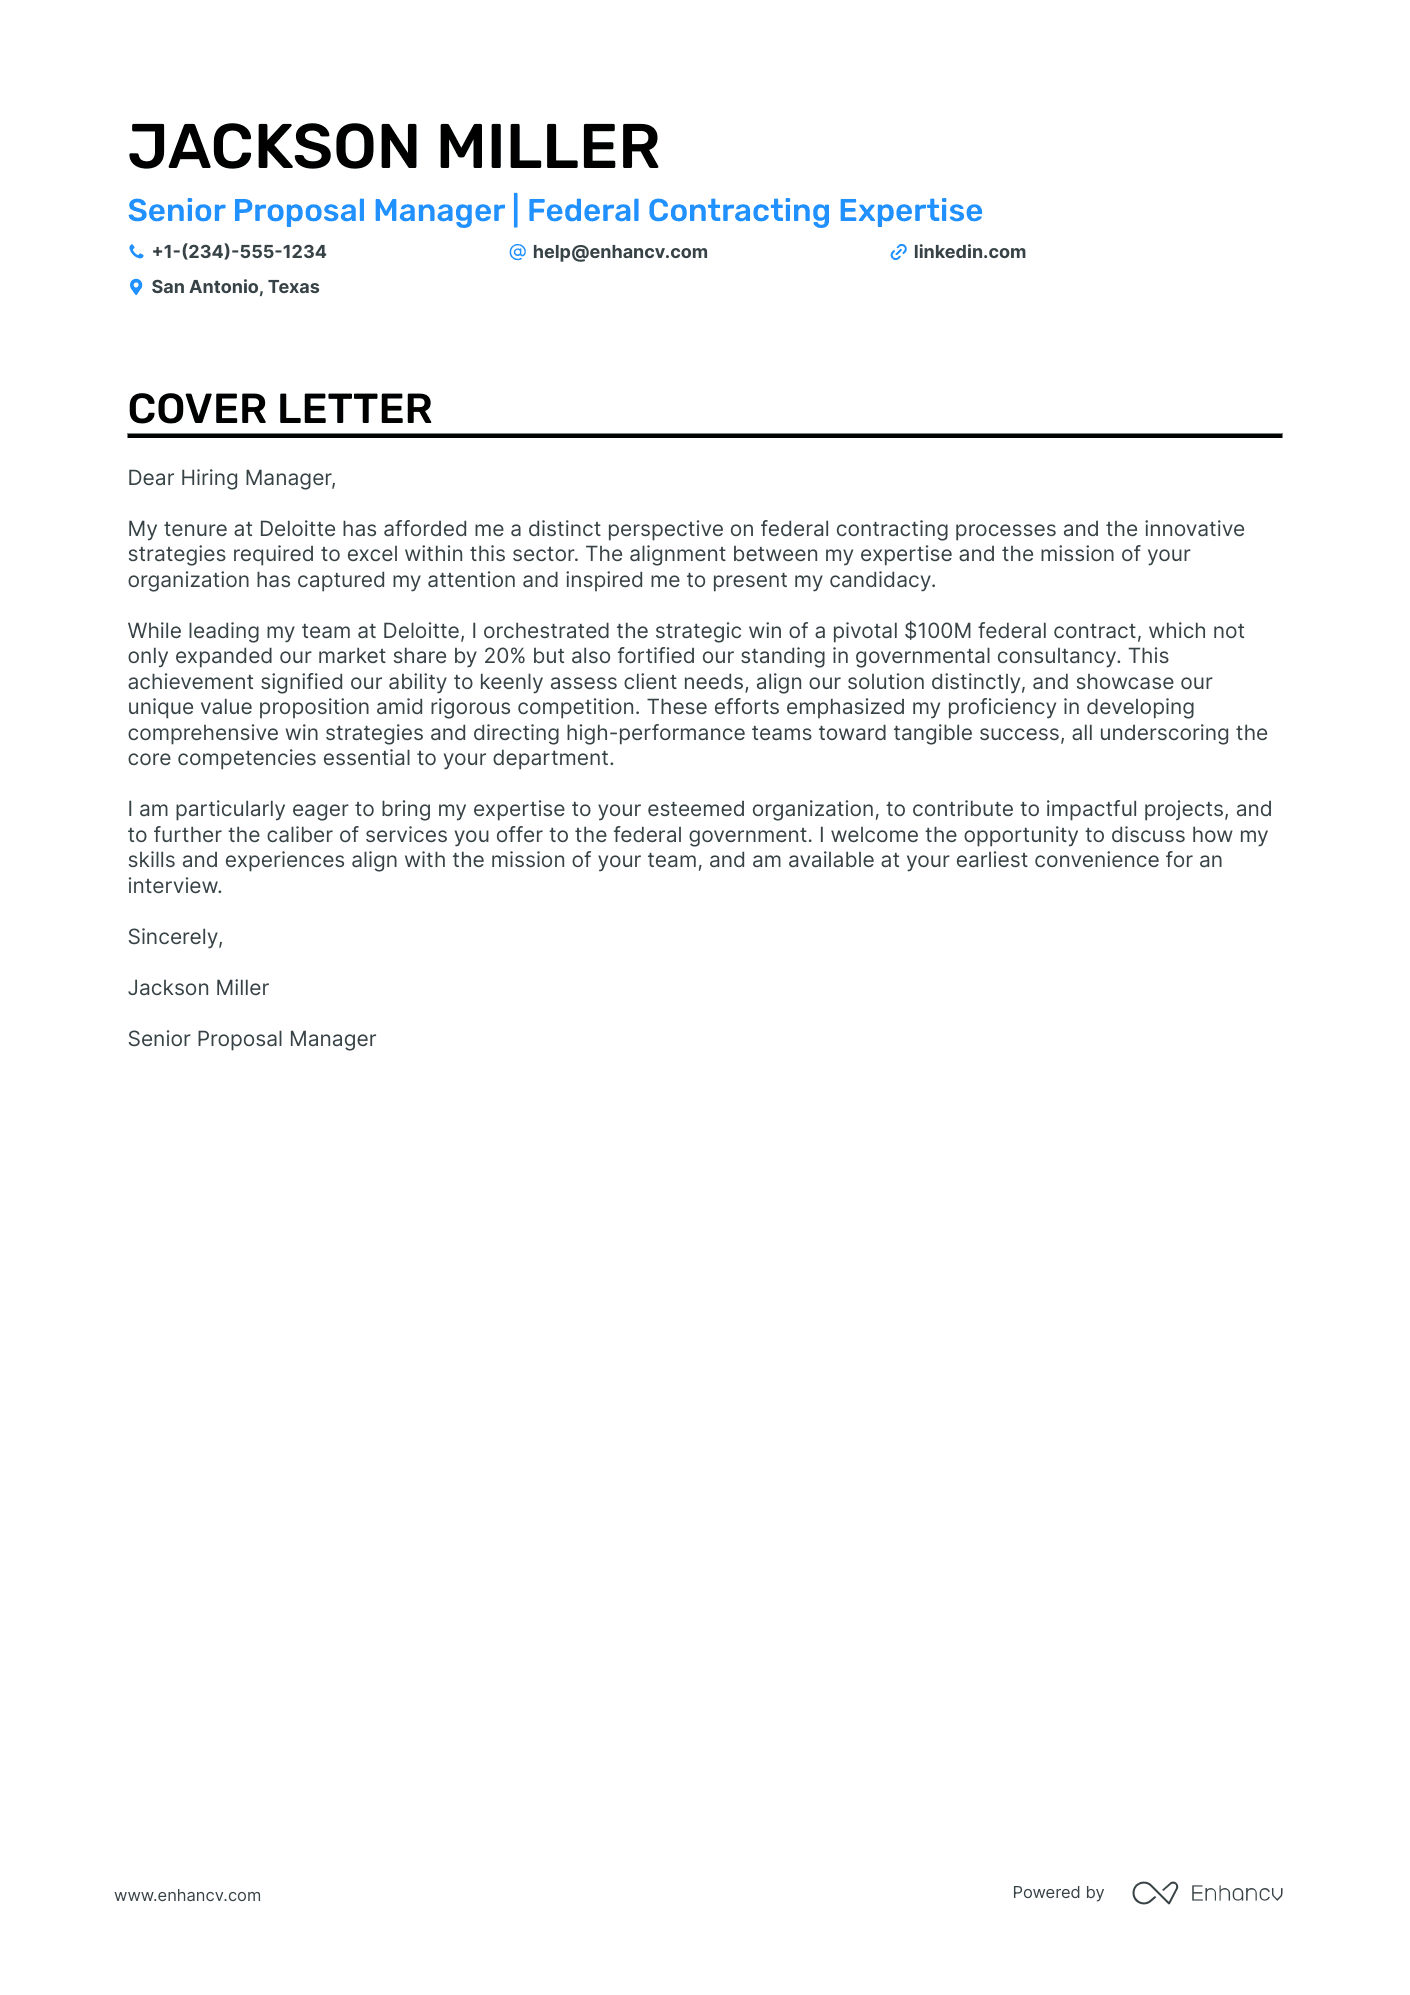 Proposal Manager cover letter